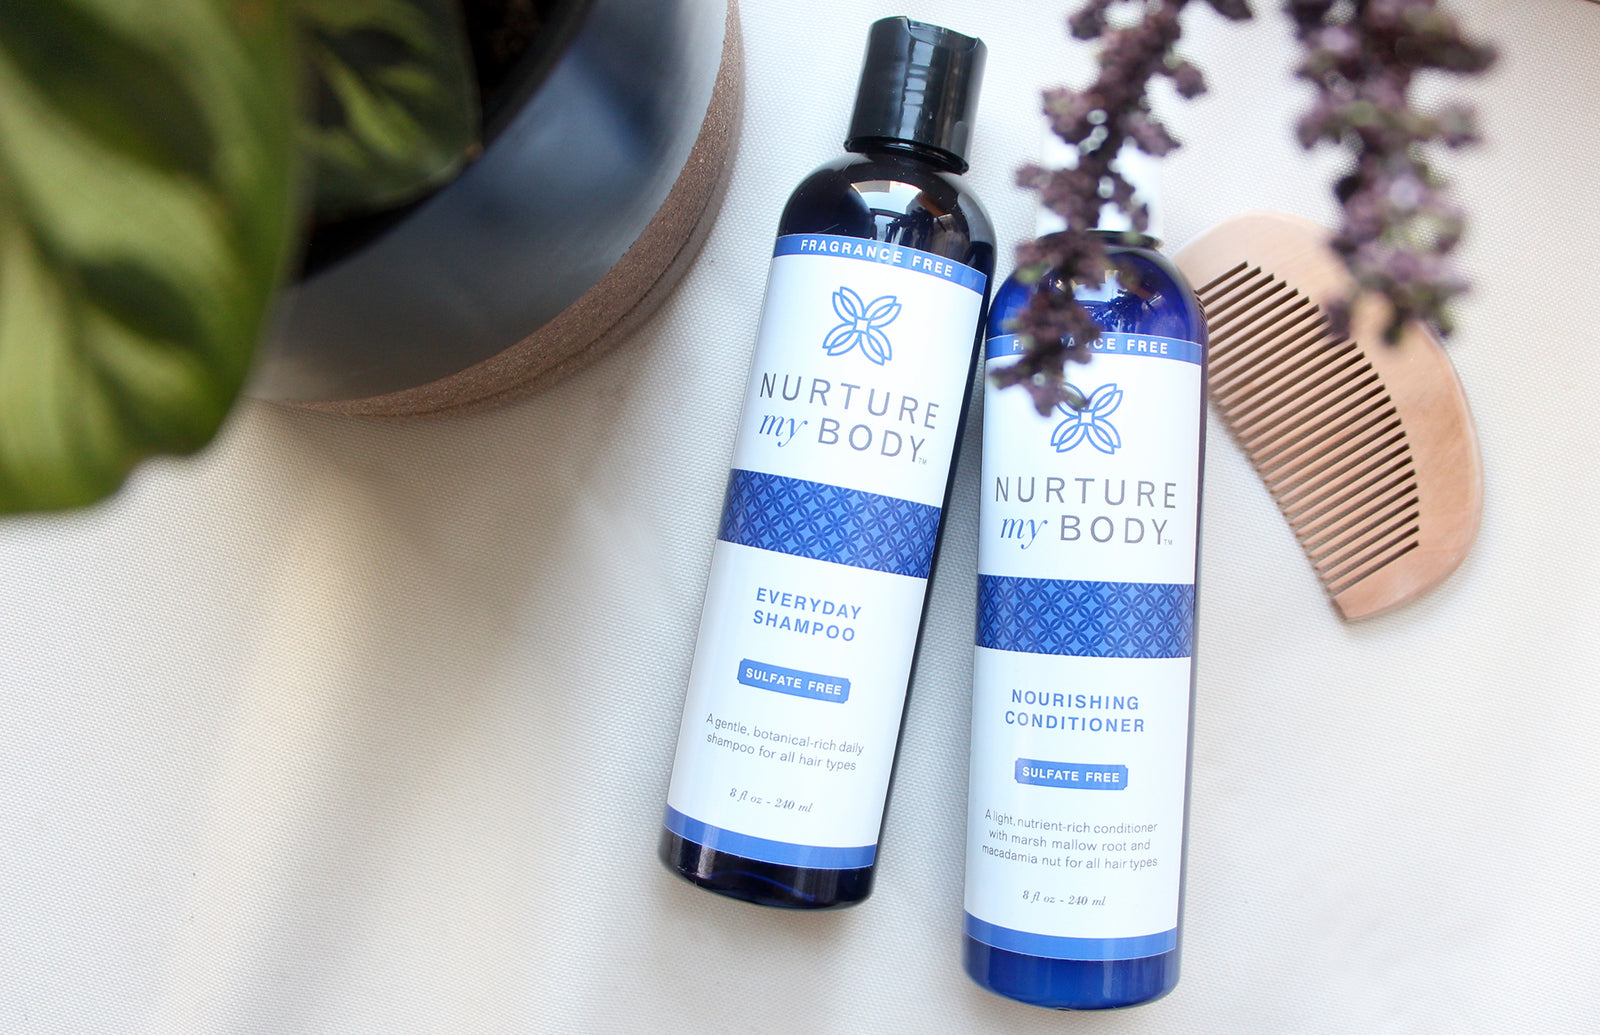 Fragrance Free Everyday Shampoo and Conditioner